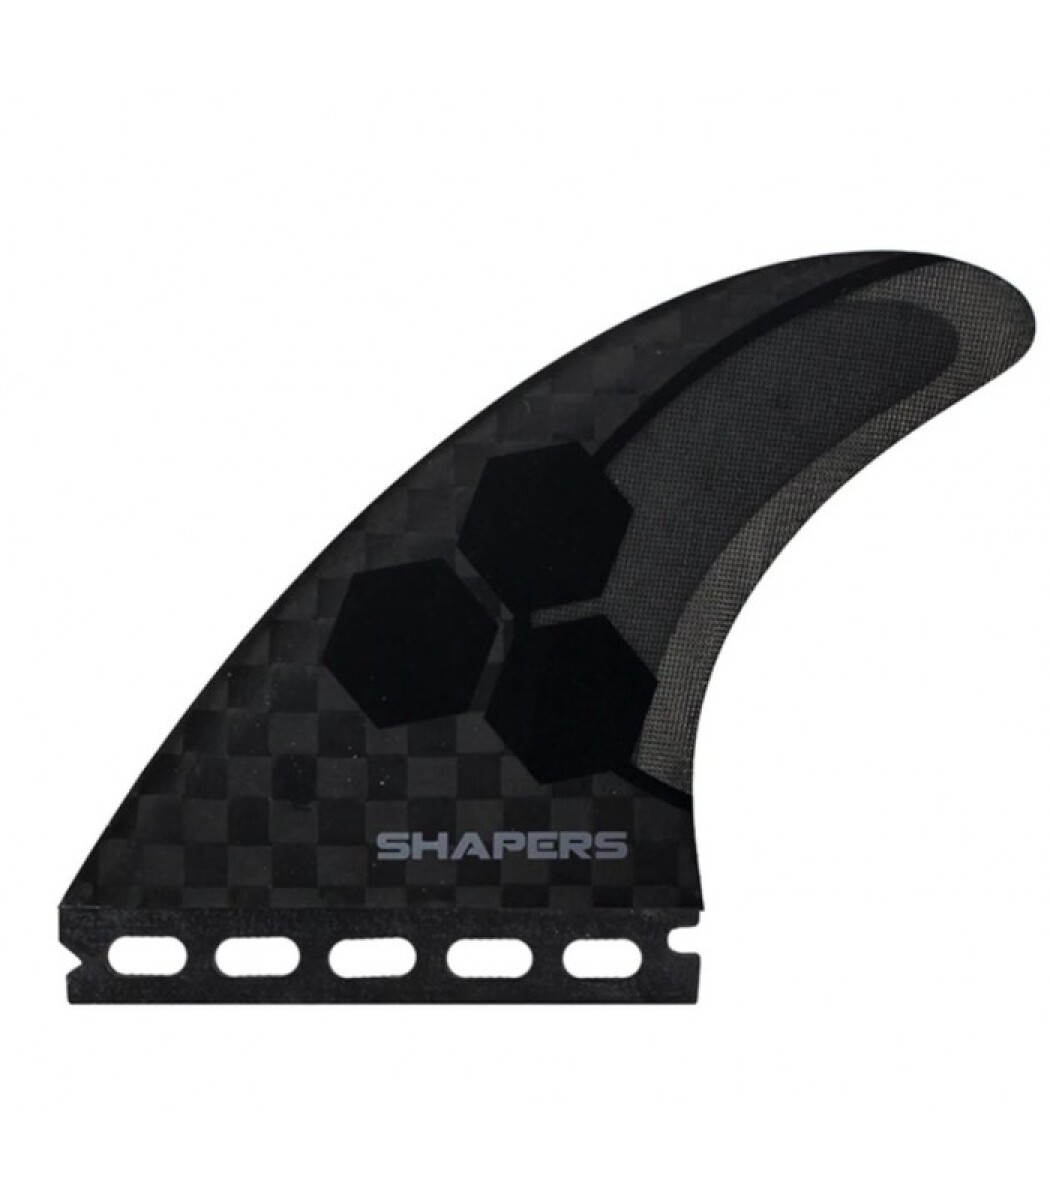 Quilla Shapers AM STEALTH Futures L 